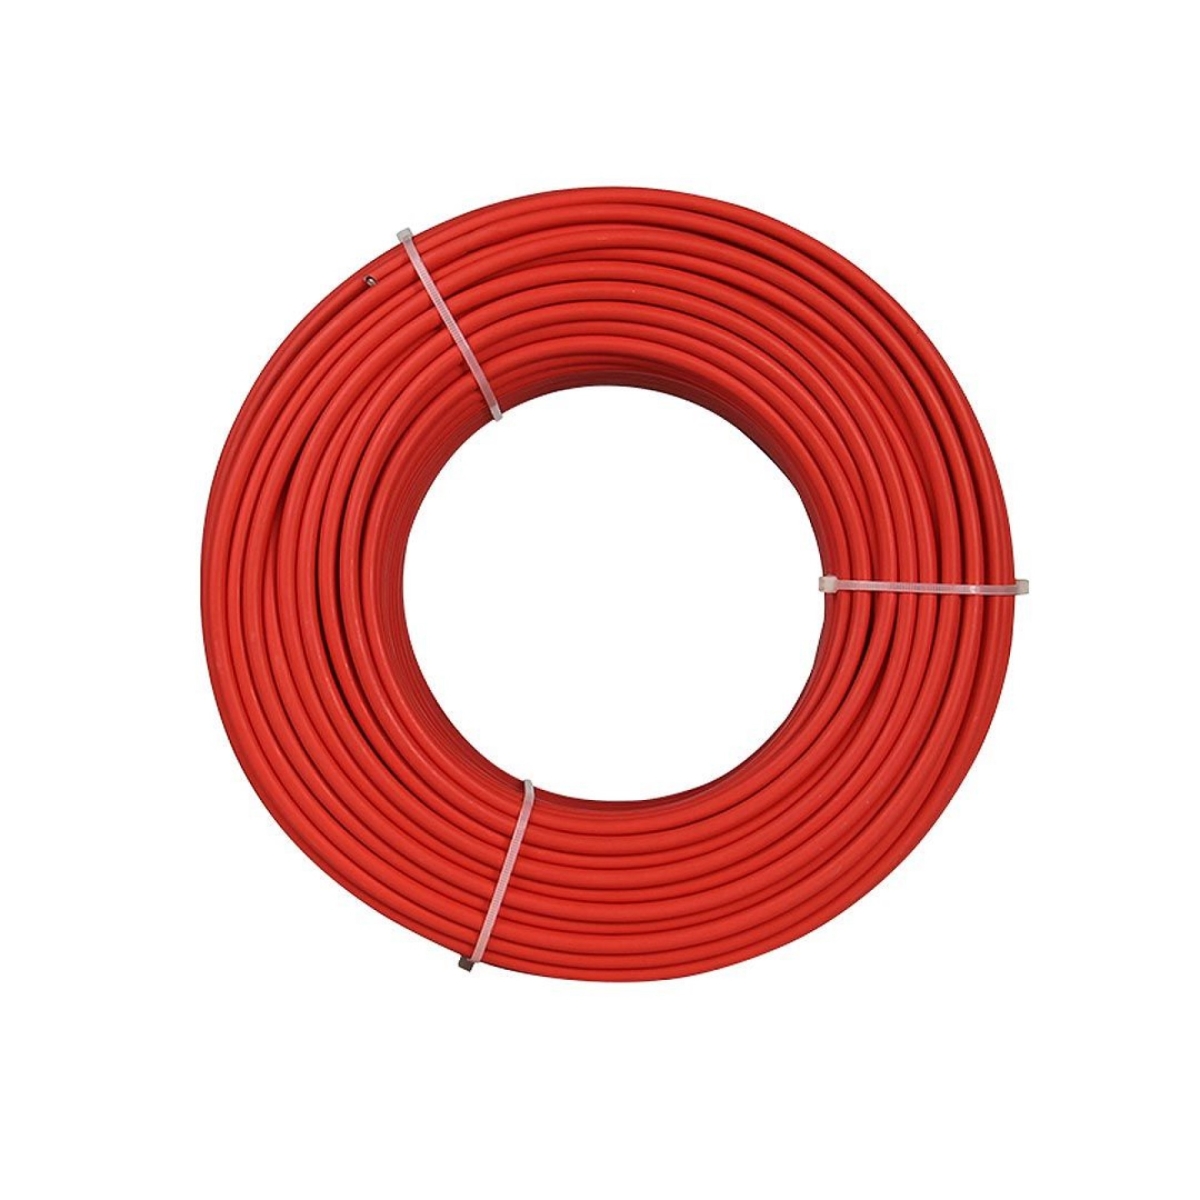 TommaTech 2.5mm² Solar Cable Red 1 Meter